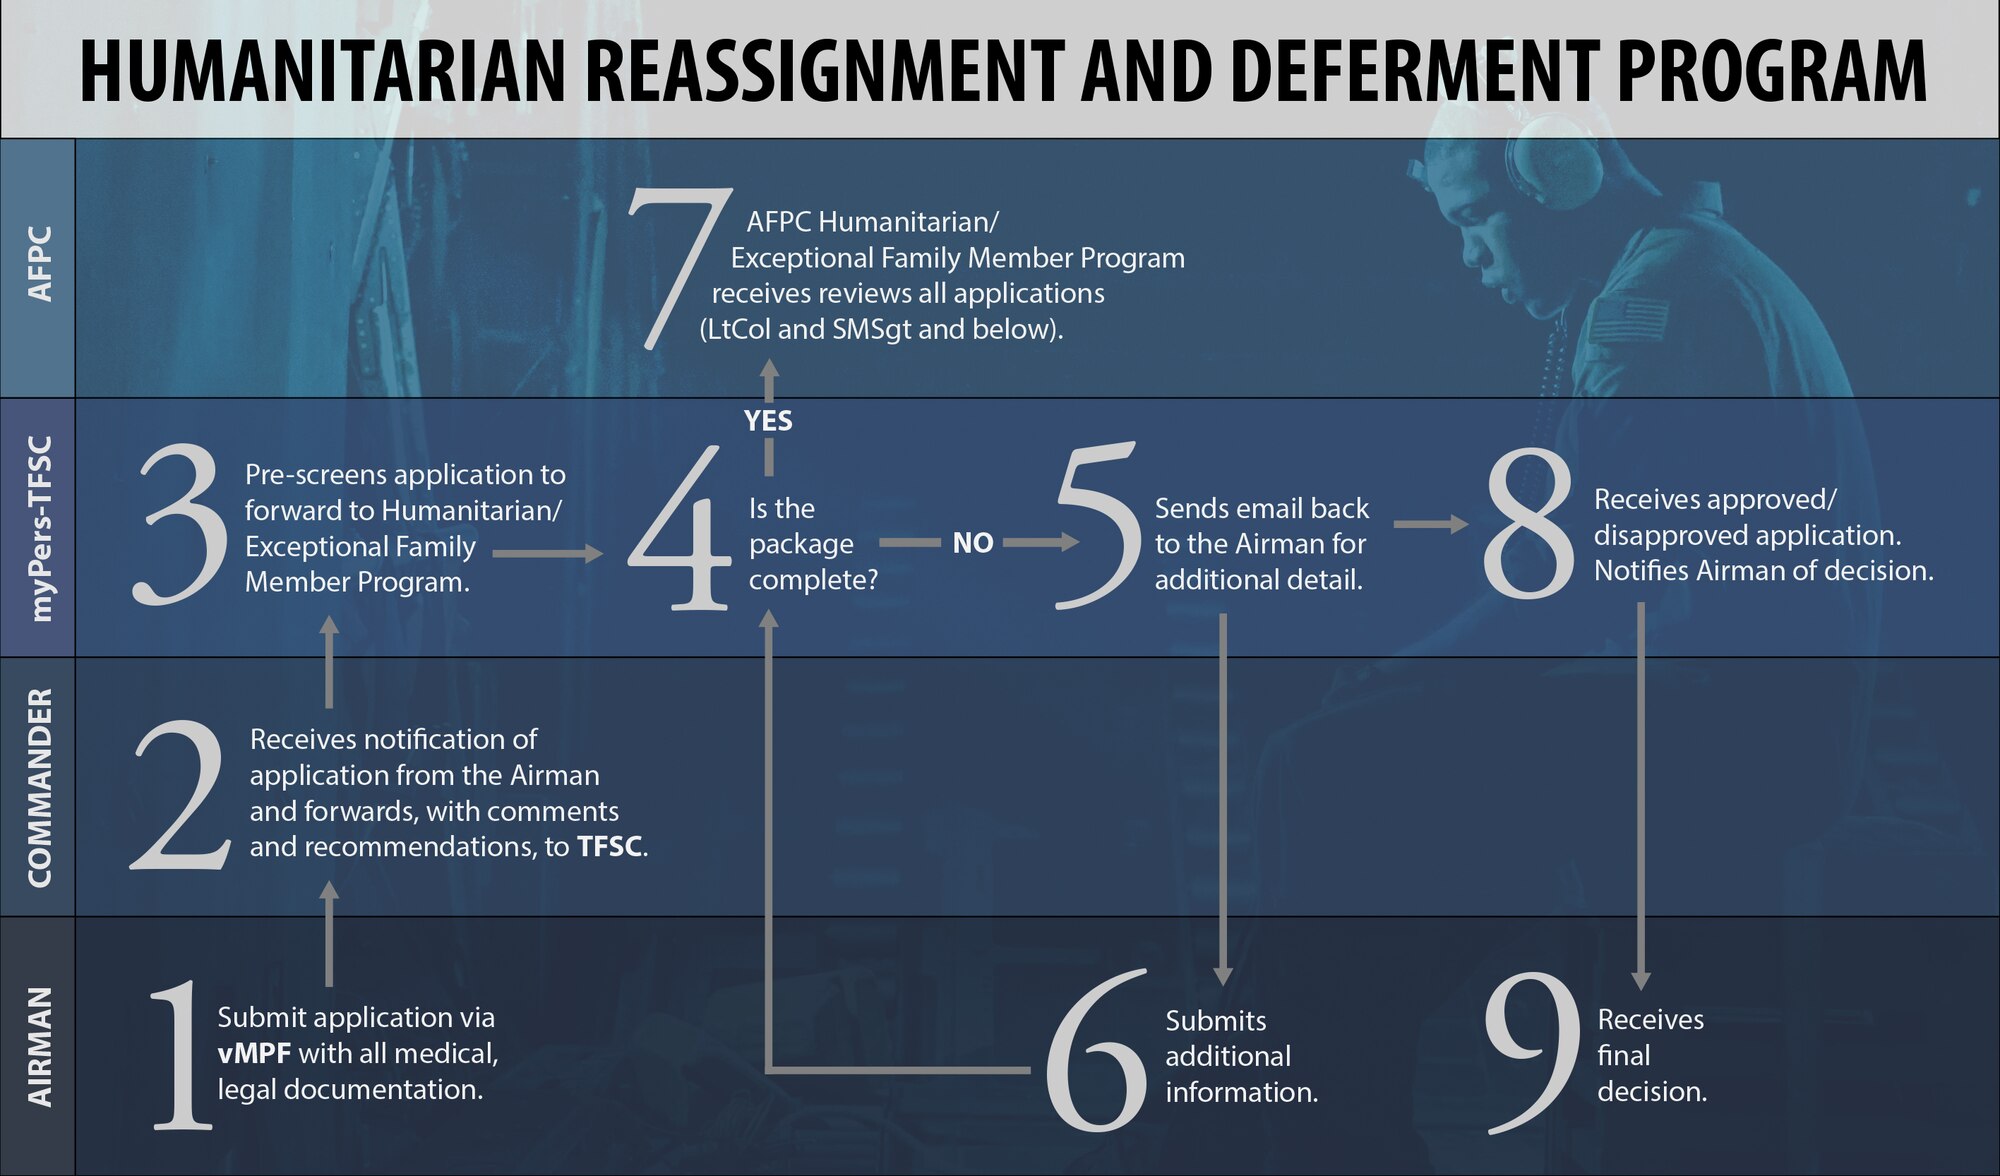 The humanitarian reassignment and deferment program follows a 9-step process to allow Airmen with severe, short-term problems involving family members to apply for special assignment consideration close to home. (U.S. Air Force graphic/Sylvia Saab)